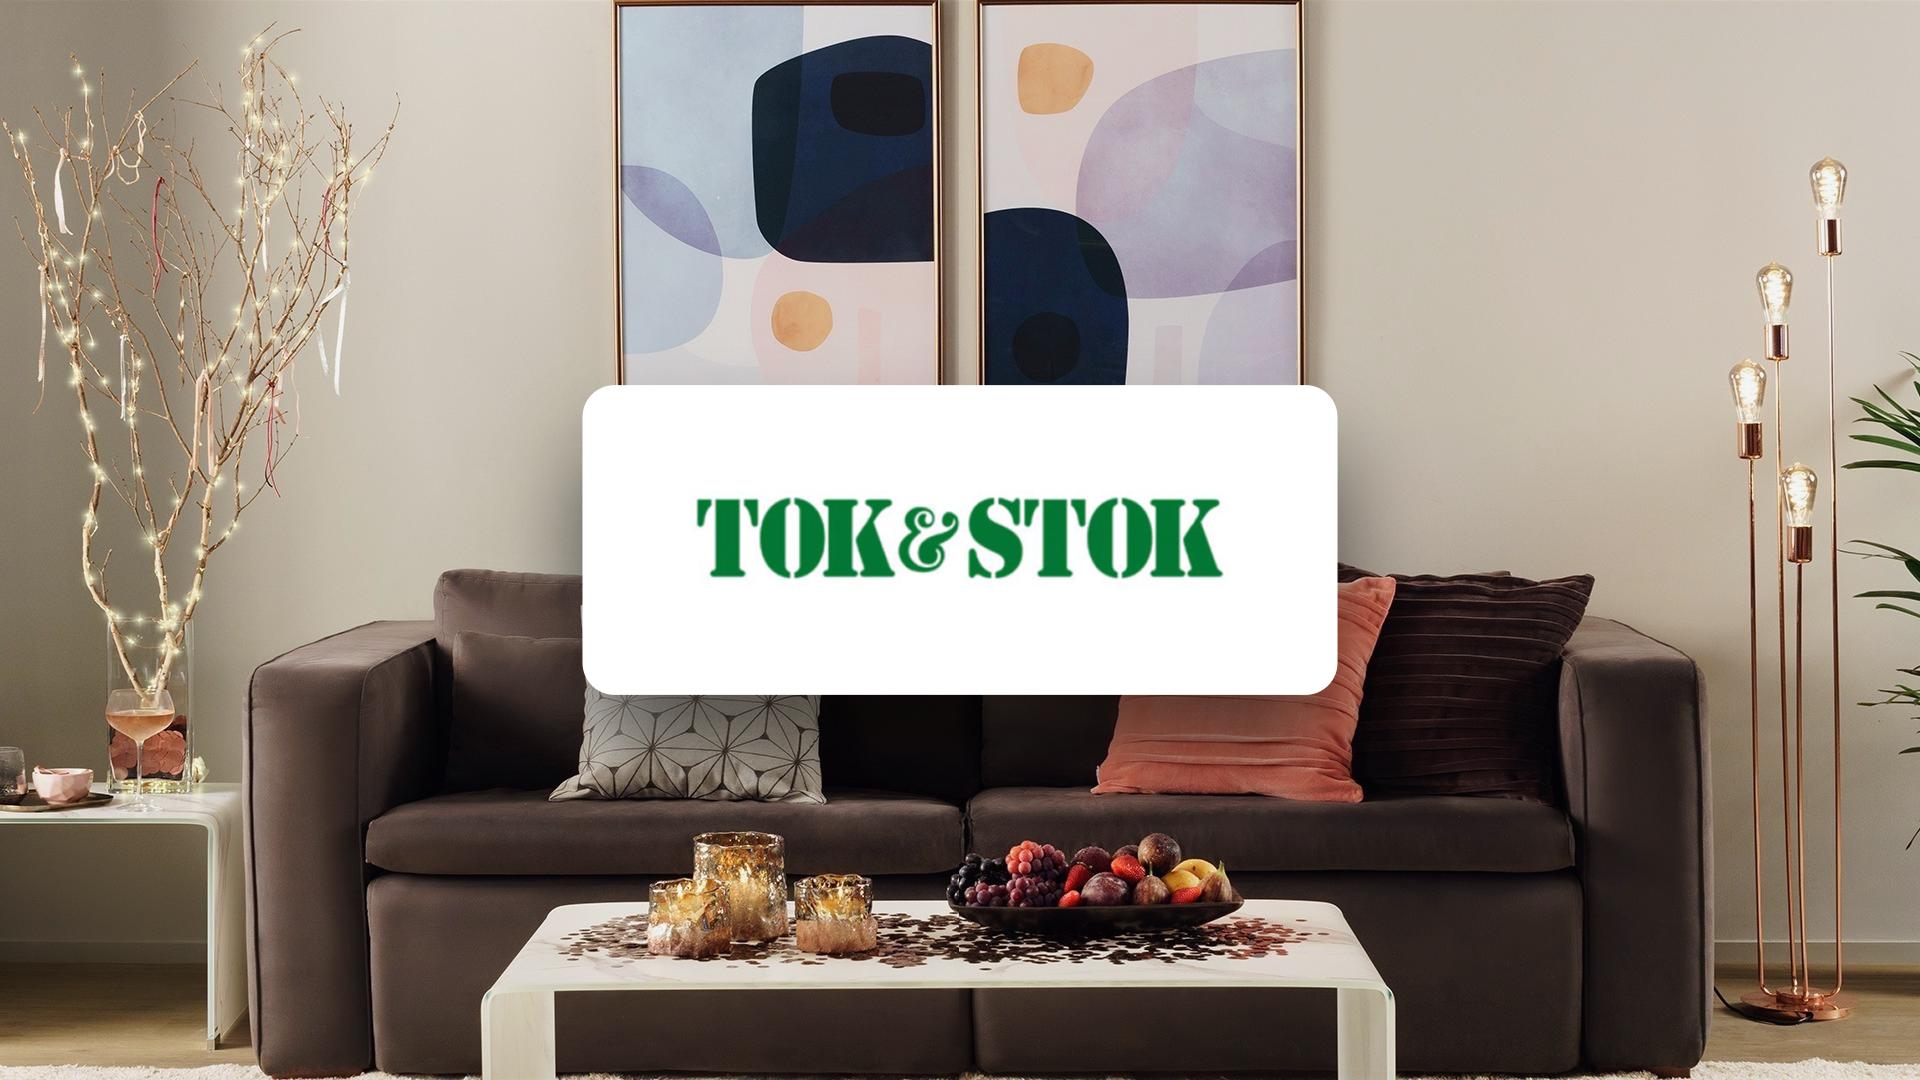 How Tok&Stok Increased Revenue by 254% While Scaling